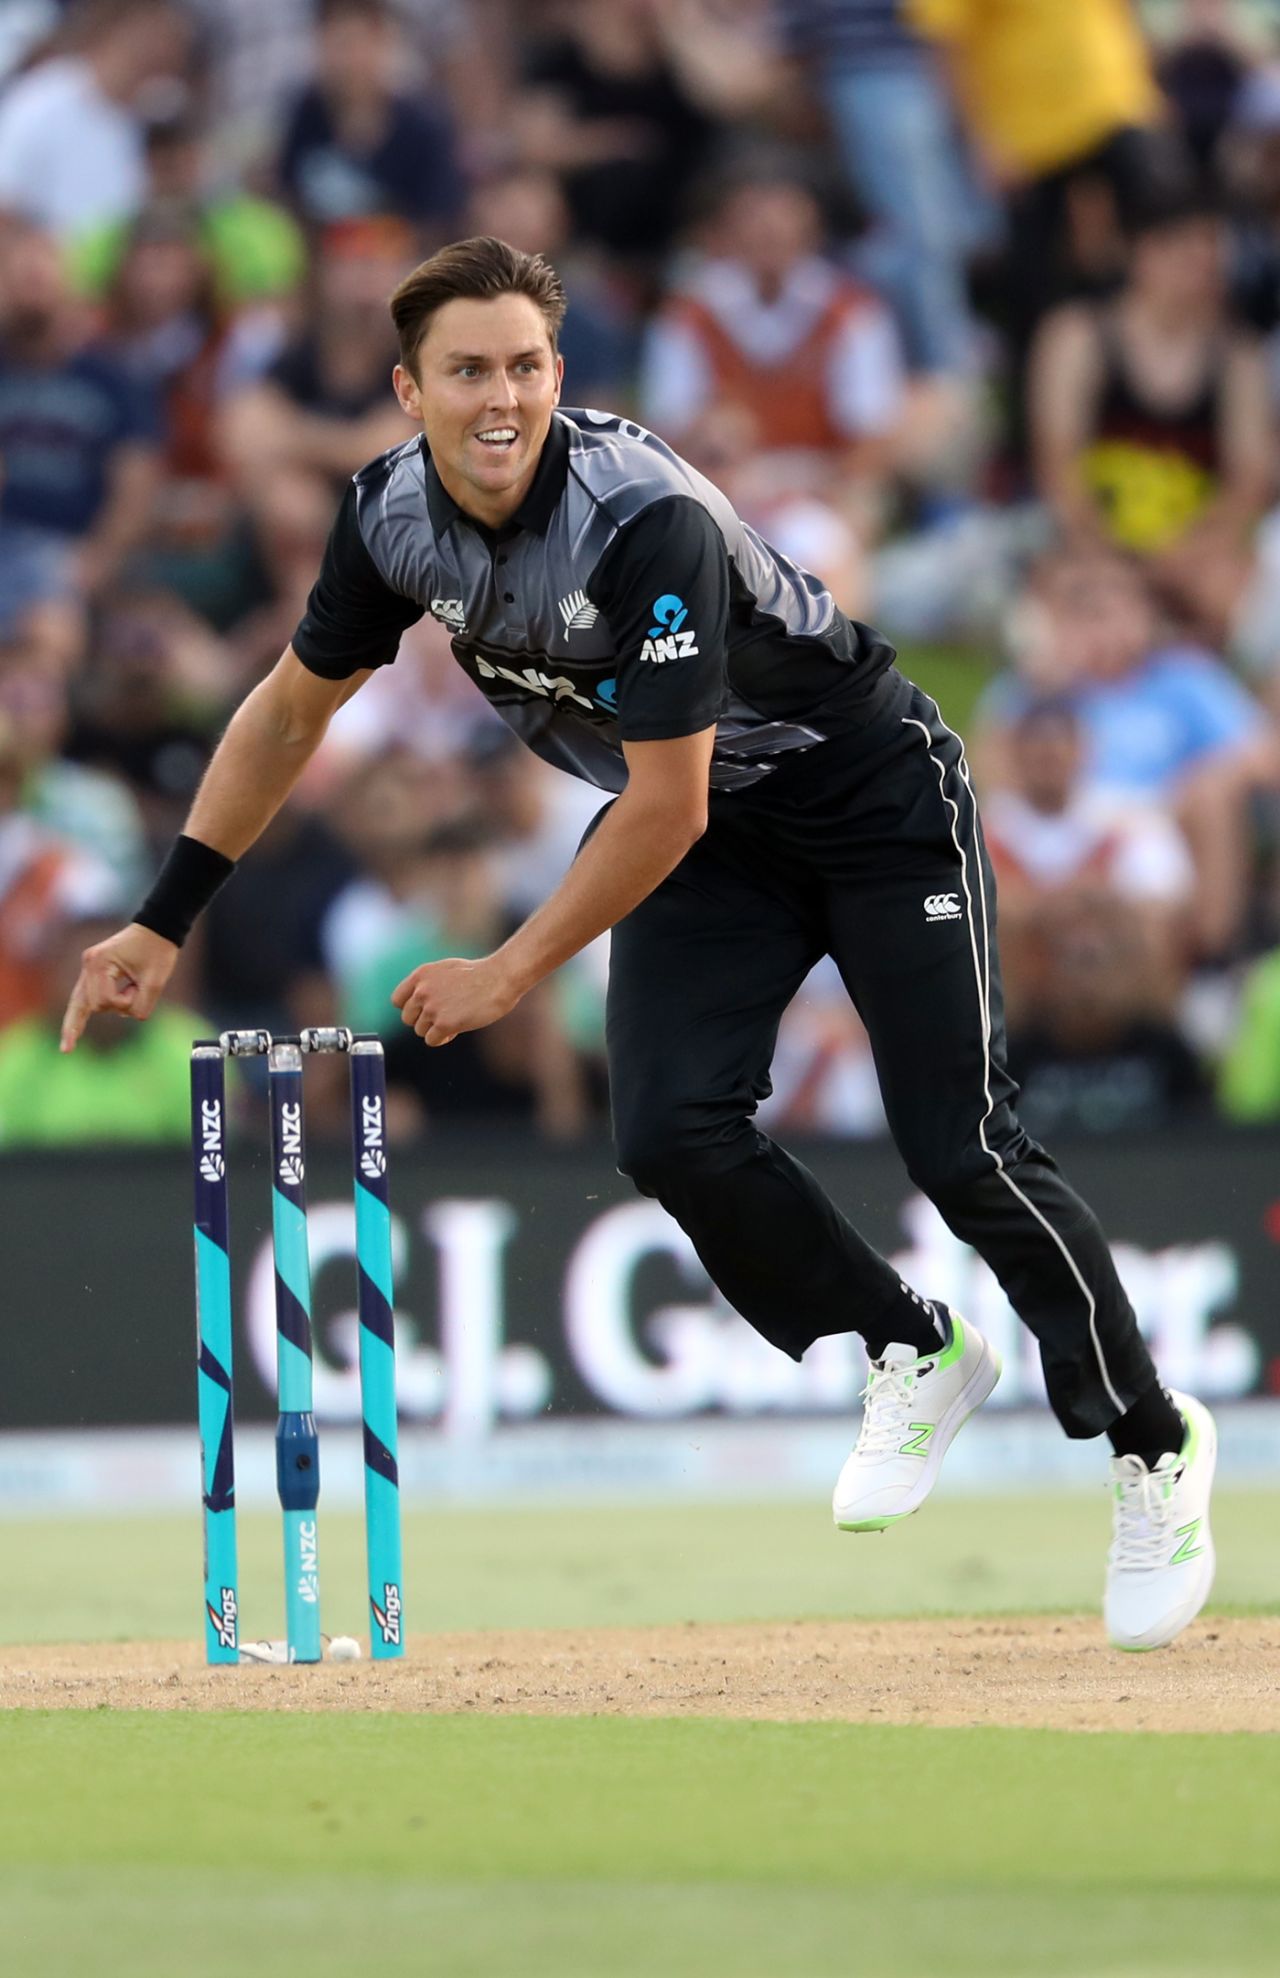 Trent Boult bagged the solitary wicket of Faheem Ashraf, Pakistan v New Zealand, 3rd T20I, Mount Maunganui, Jan 28, 2018